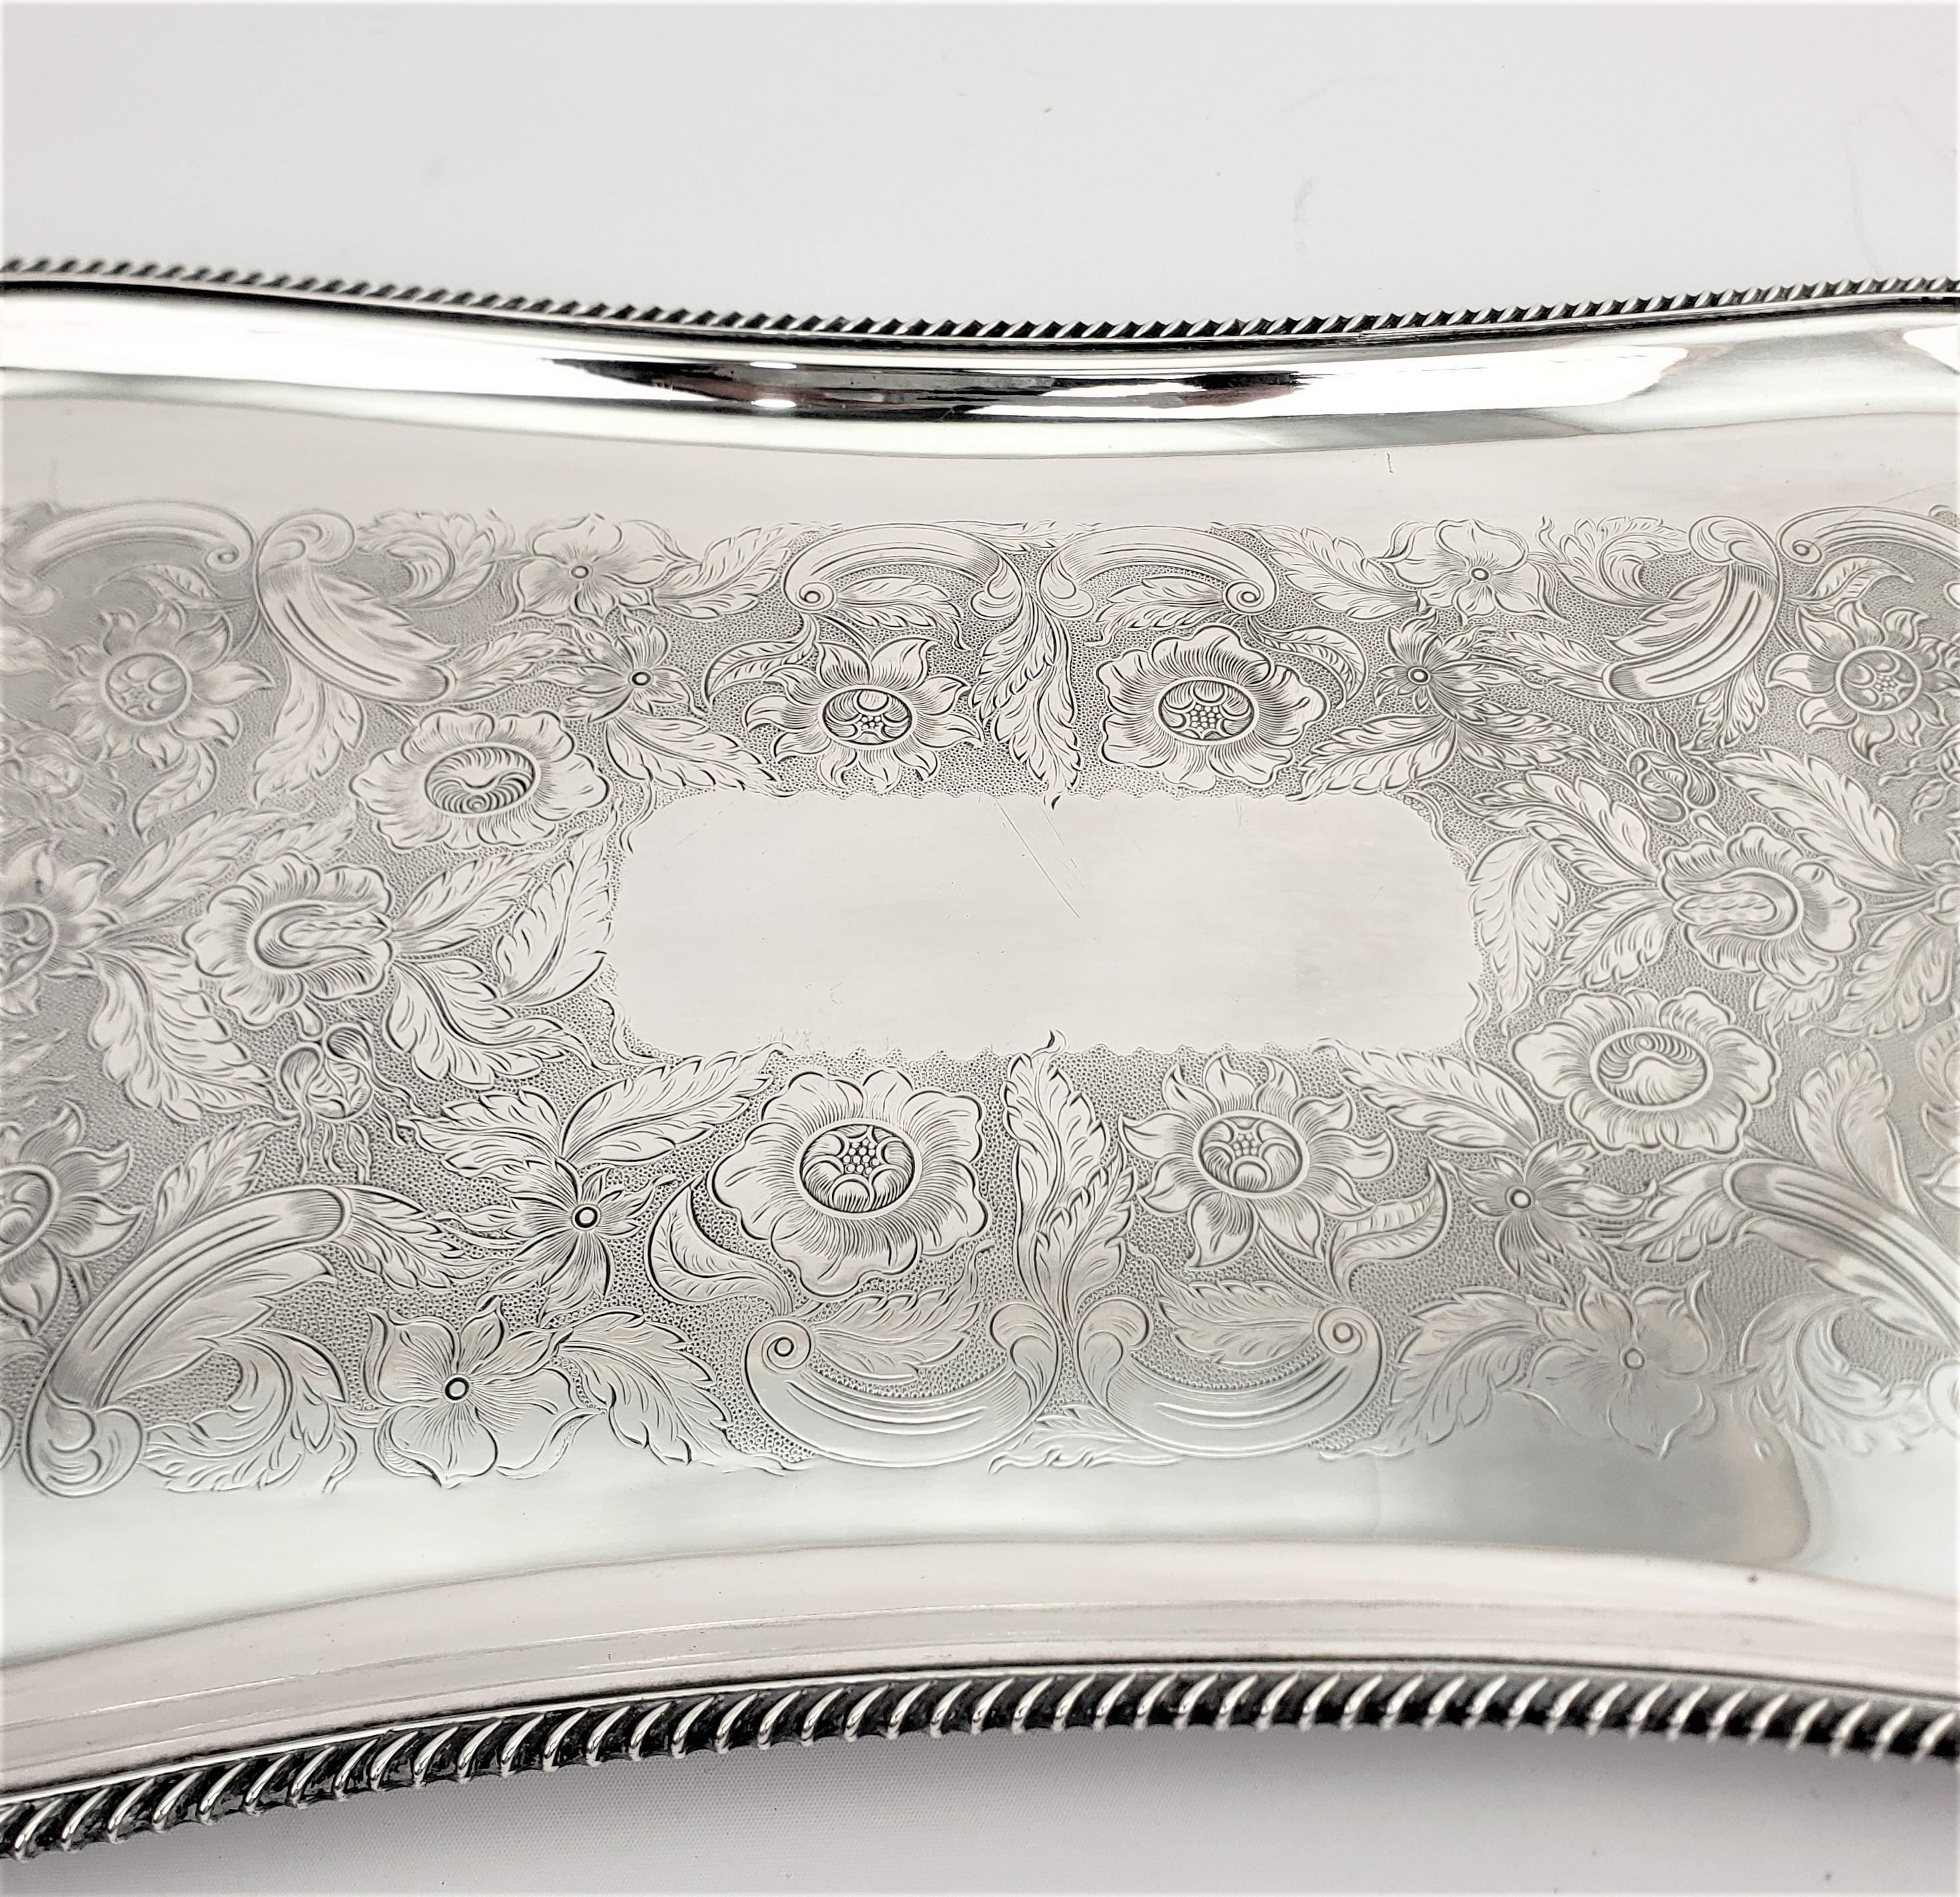 Engraved Antique Birks Silver Plated Rectangular Serving Tray with Floral Engraving For Sale